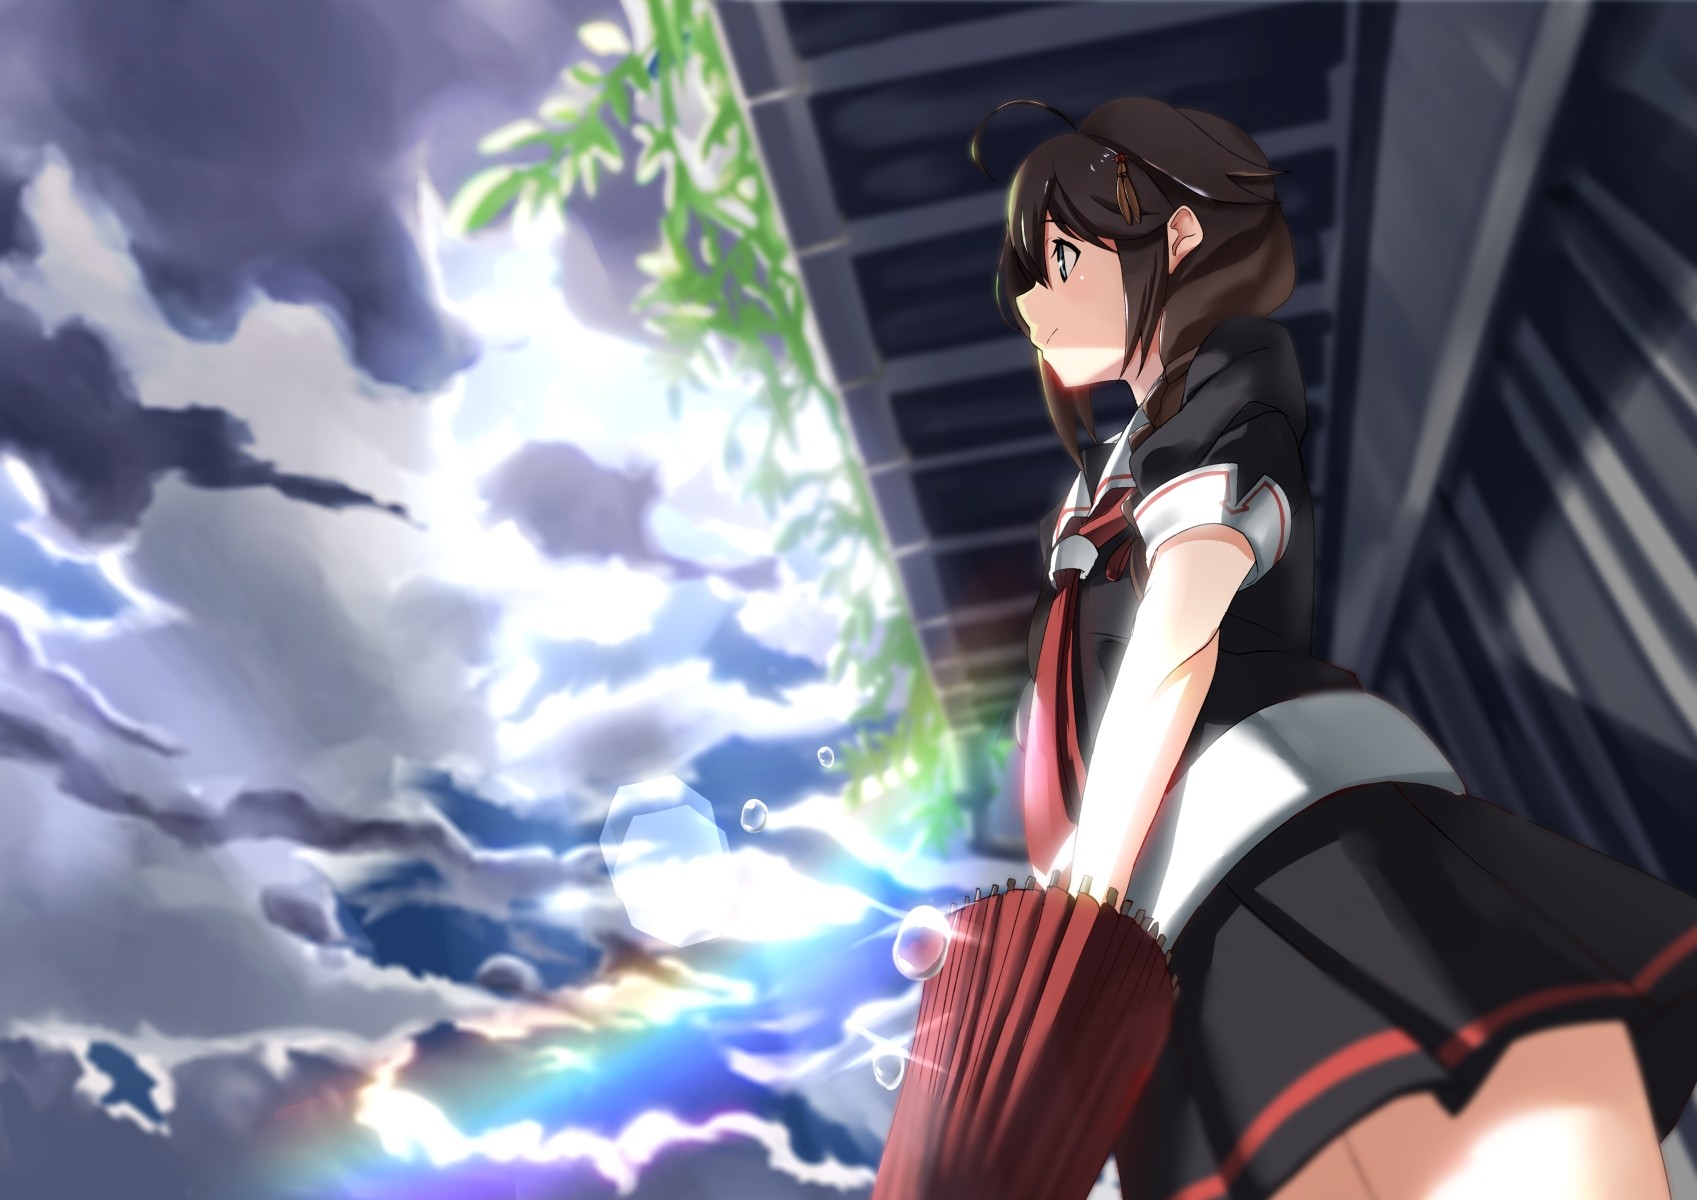 Anime 1697x1200 anime anime girls Kantai Collection Shigure (KanColle) clouds sky umbrella Pixiv women with umbrella brunette black clothing women outdoors standing low-angle